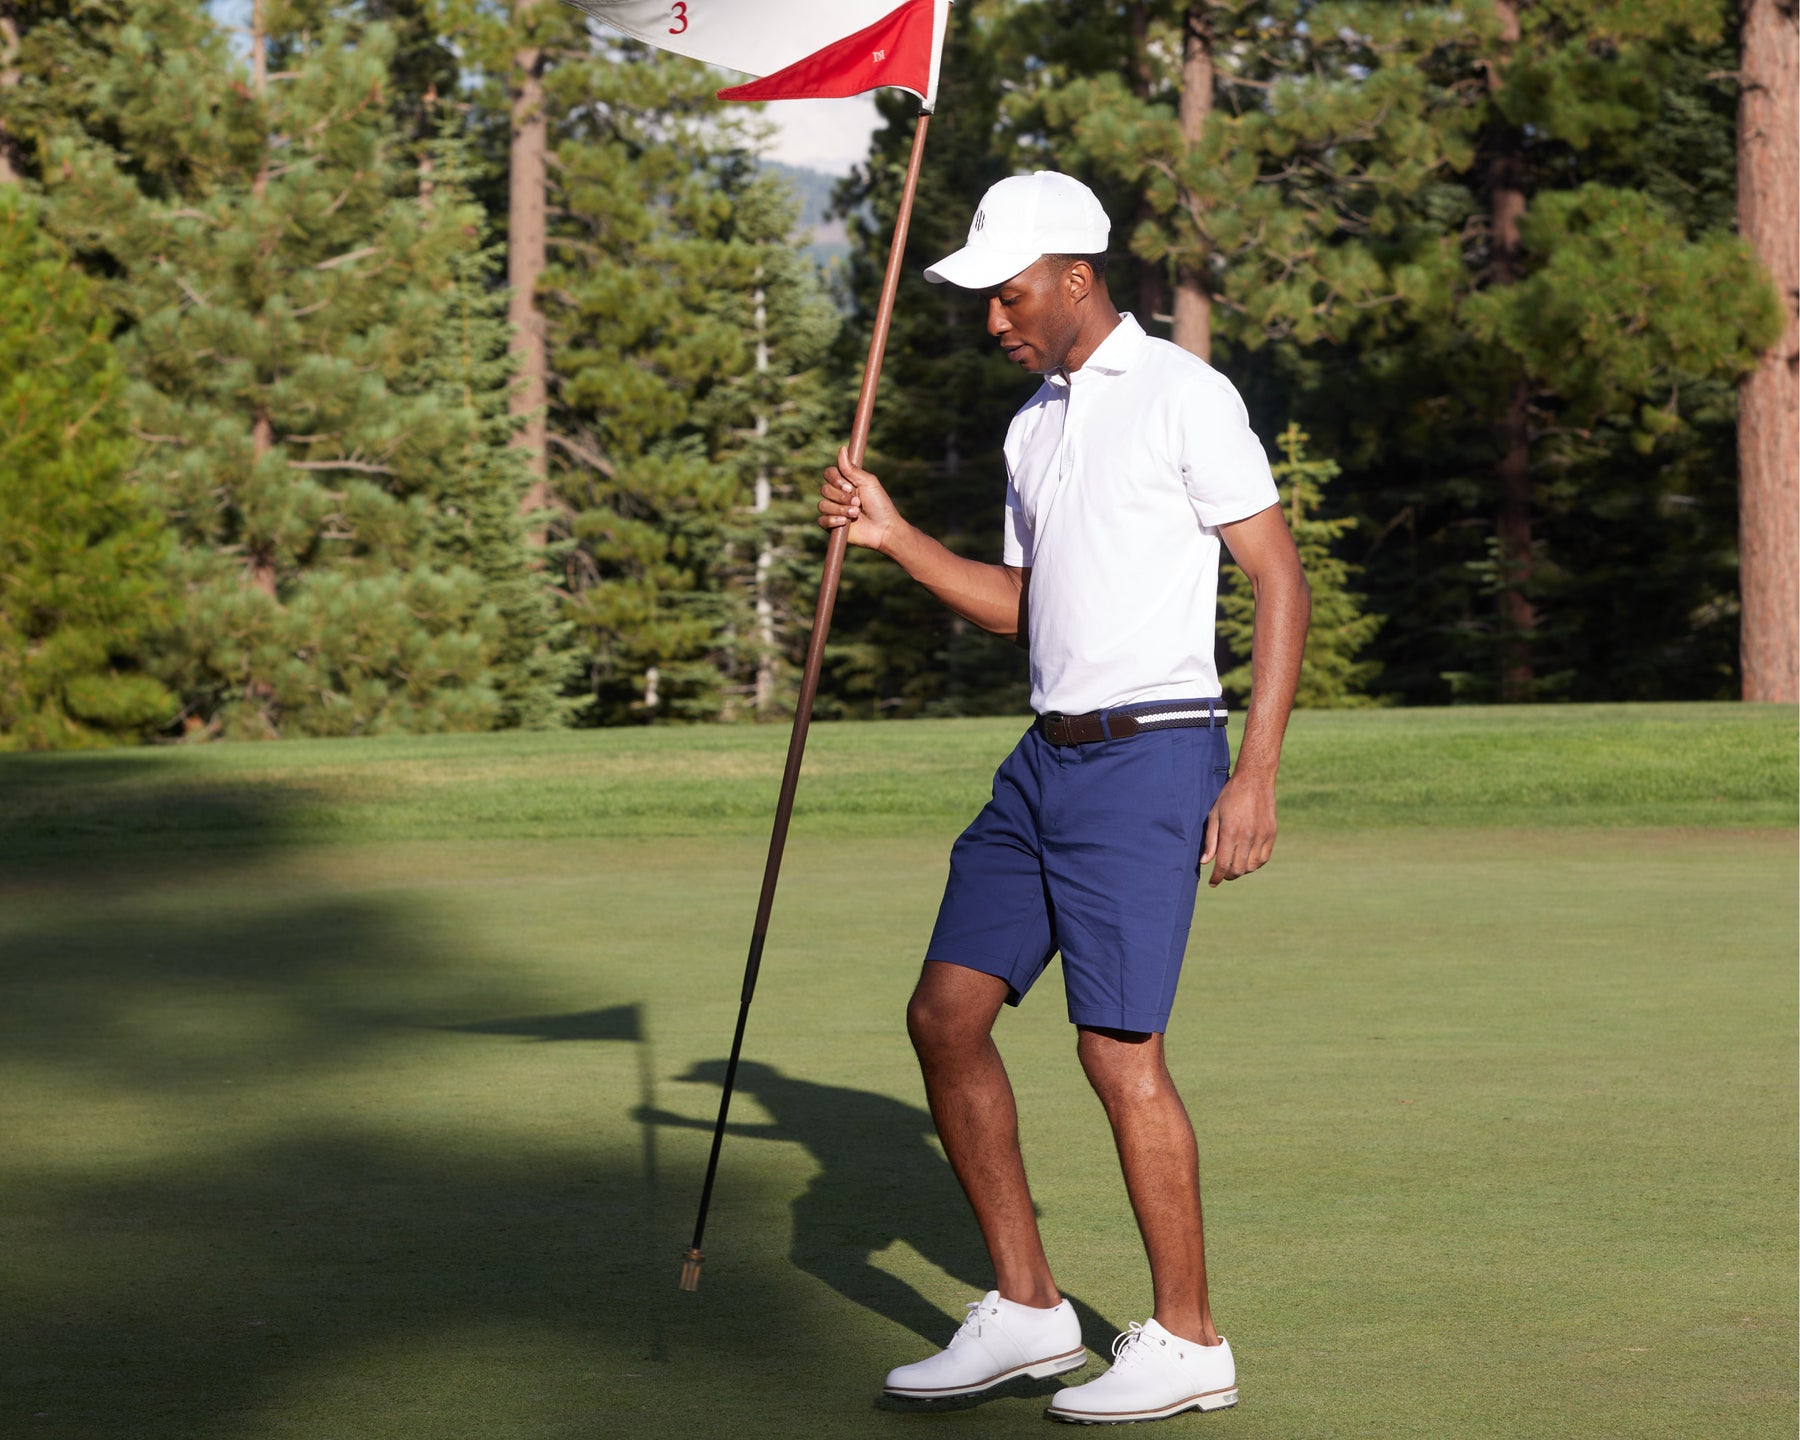 Male golfer wearing men white polo shirt holds red flag on golf course.